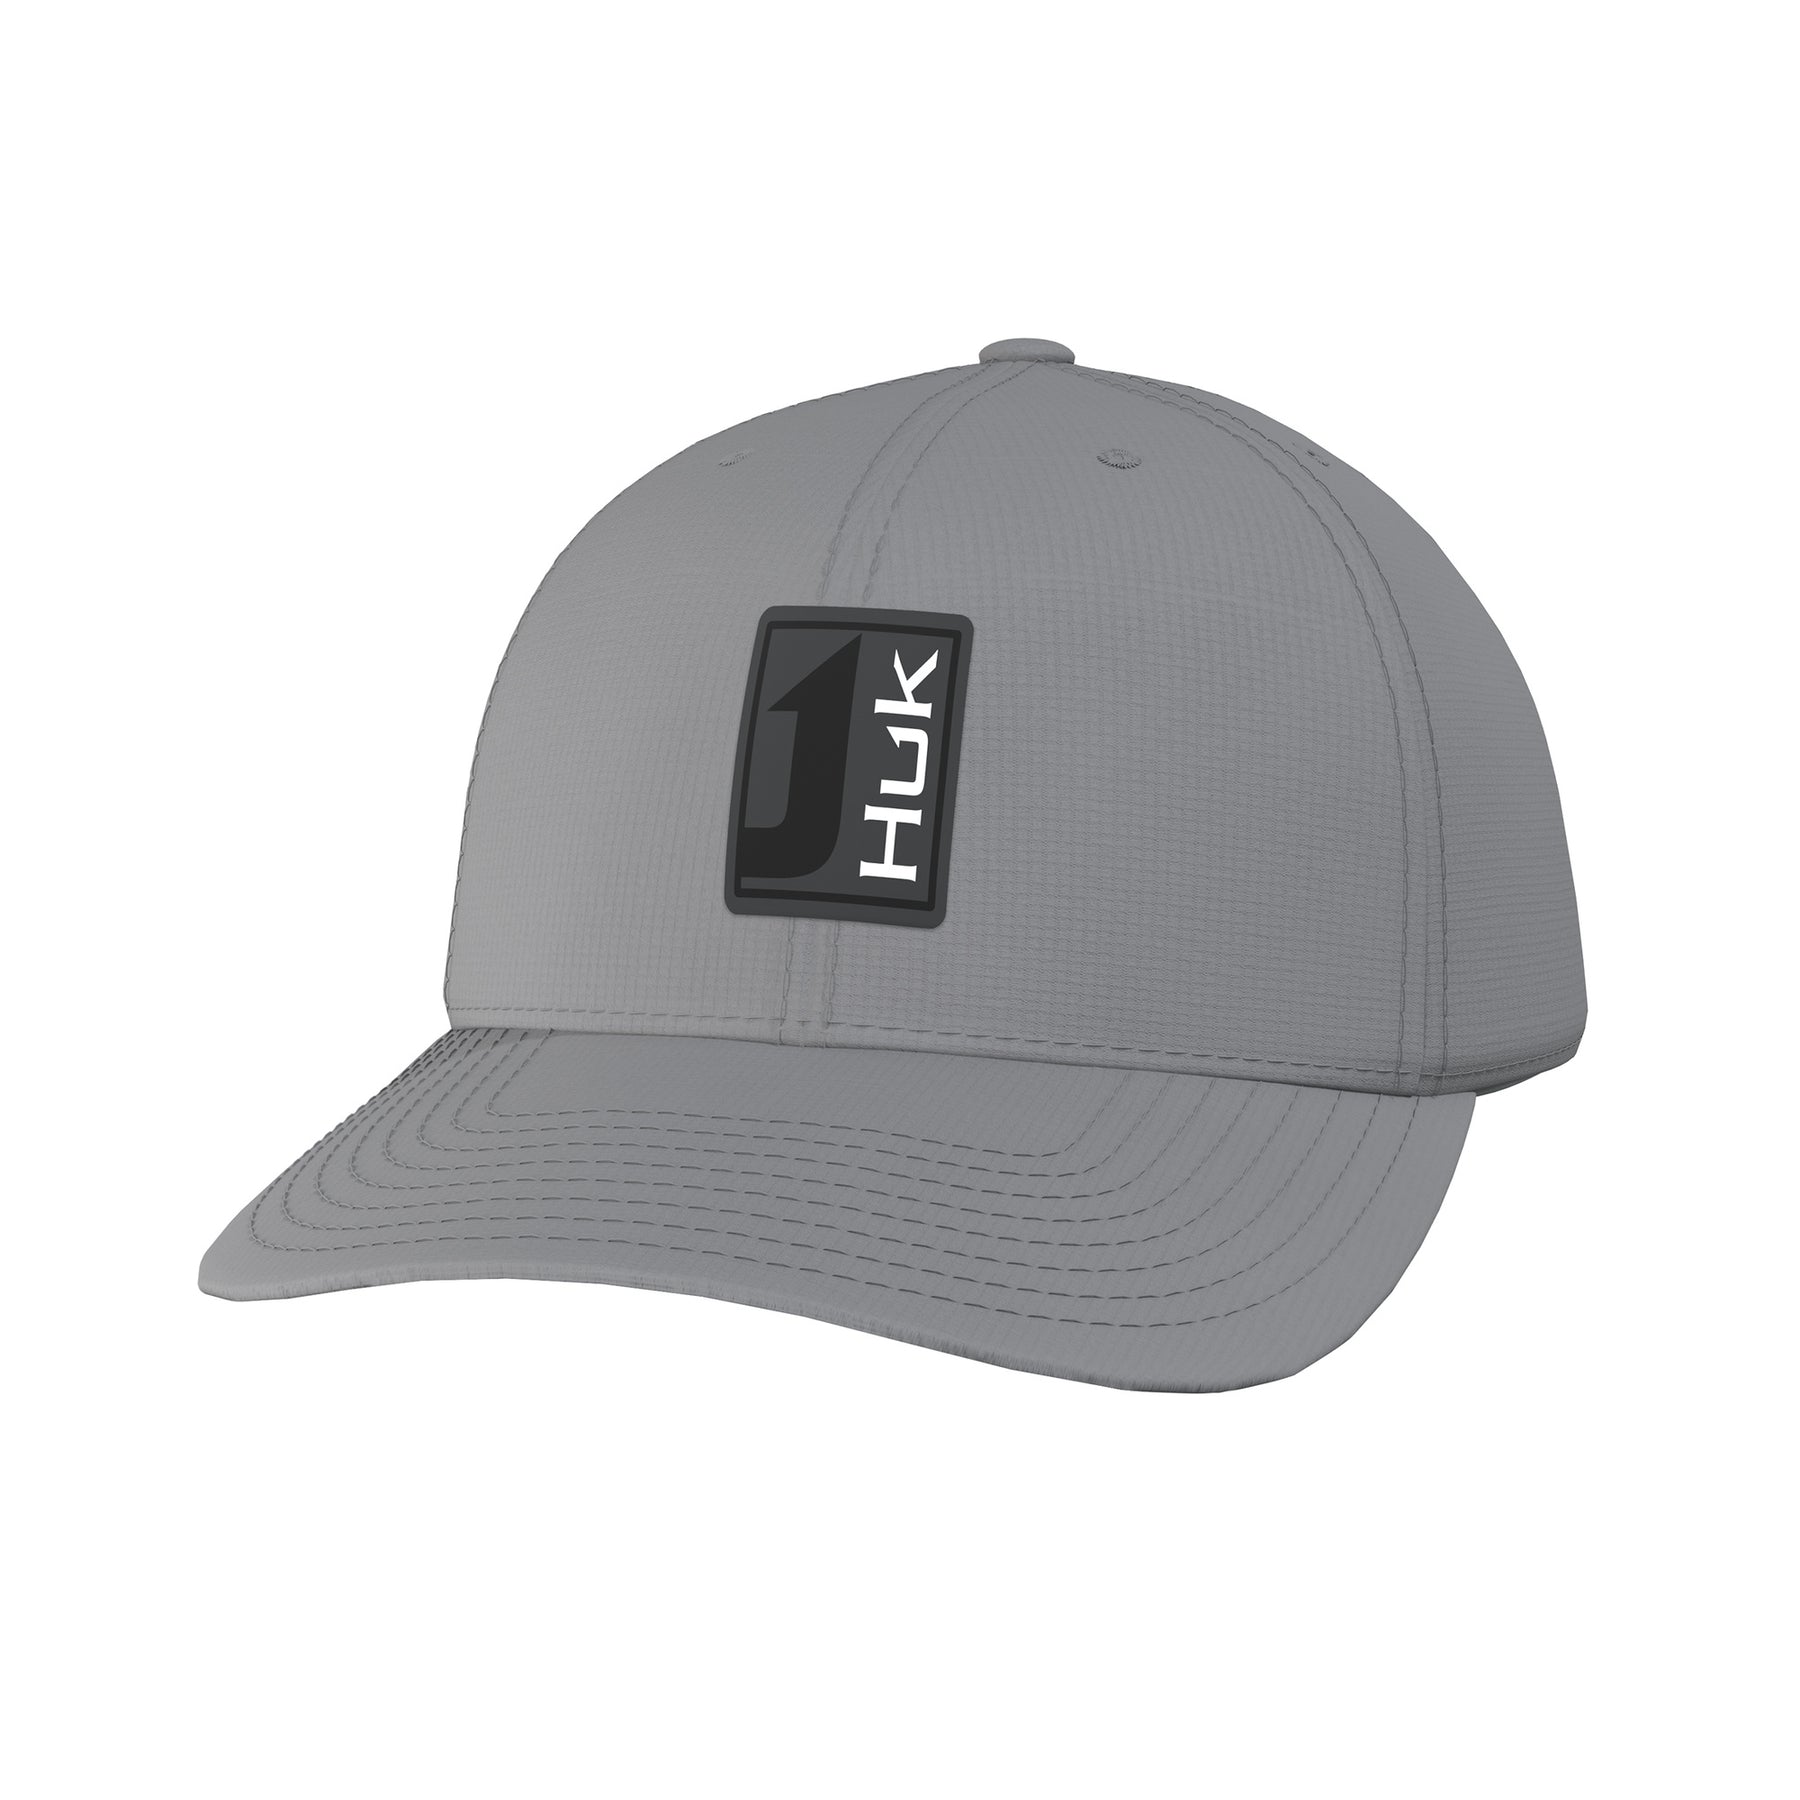 Huk Men's A1A Sun Hat - Black - One Size Fits Most - Black One Size Fits  Most